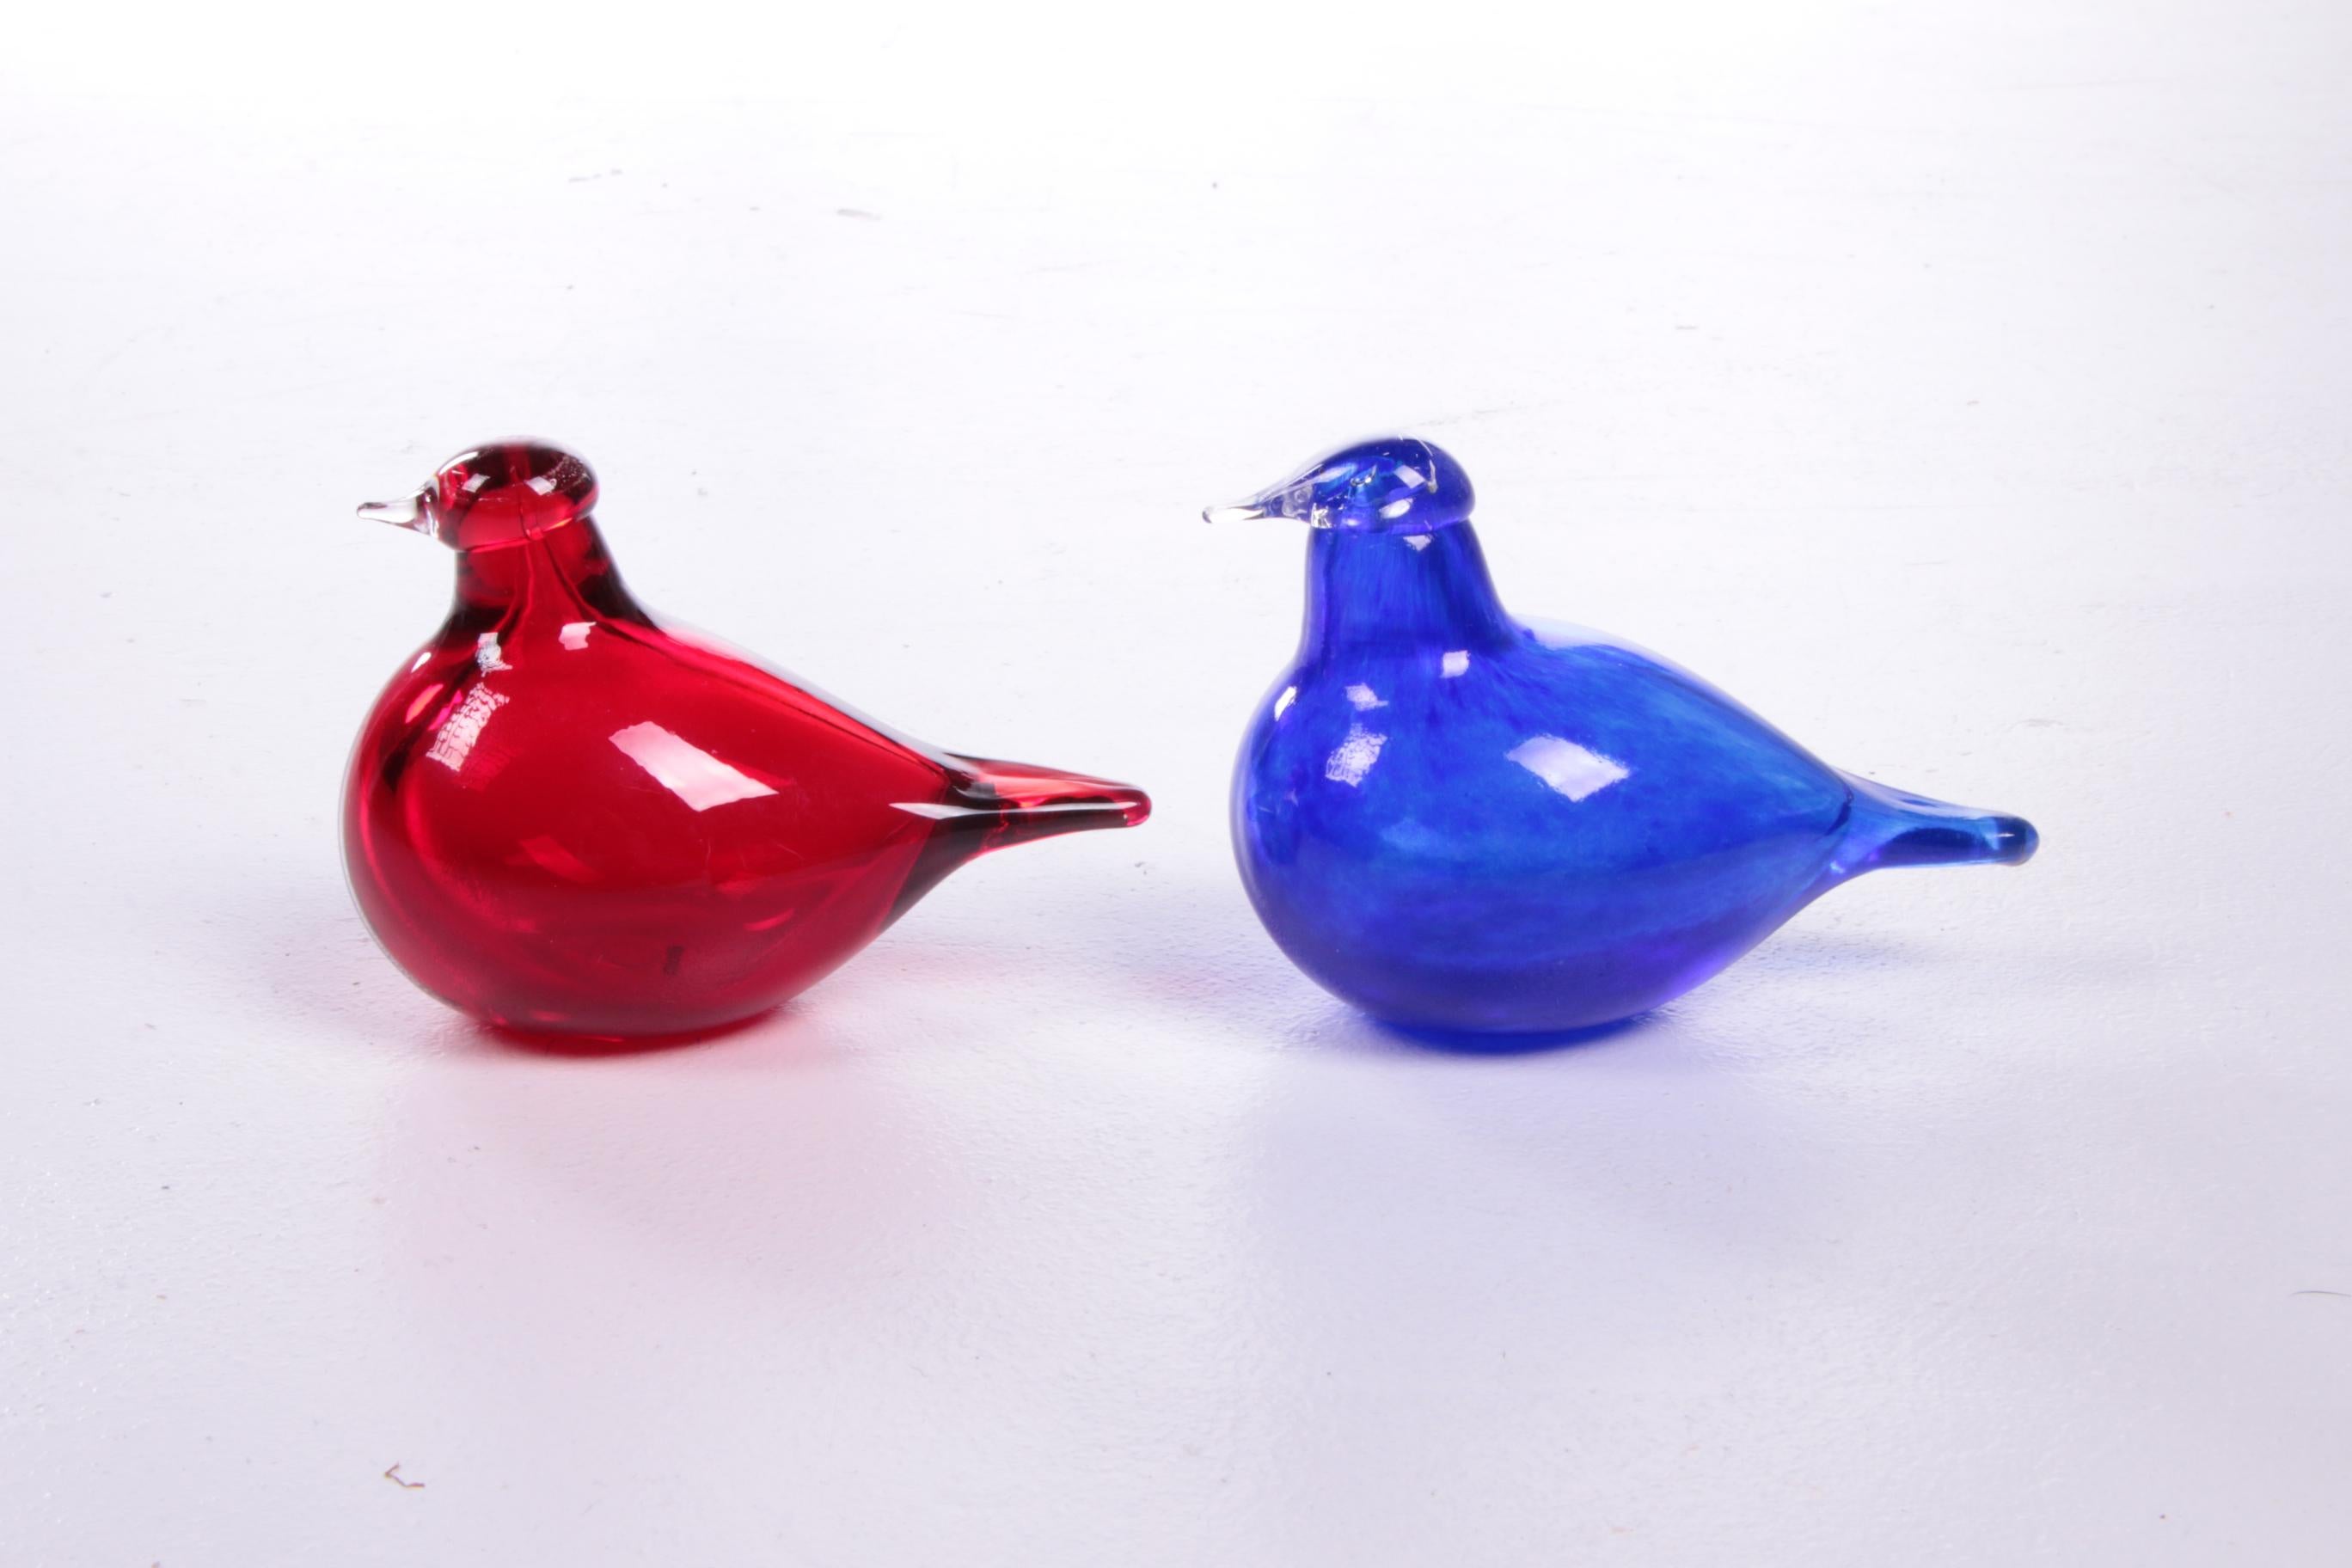 The Little Tern has been a fan favorite since its debut in 2005 and we have a beautiful set in a red and blue variant.

Toikka collectors will be pleased to hear that this beautiful performance features the same plump body, tapered tail, delicate